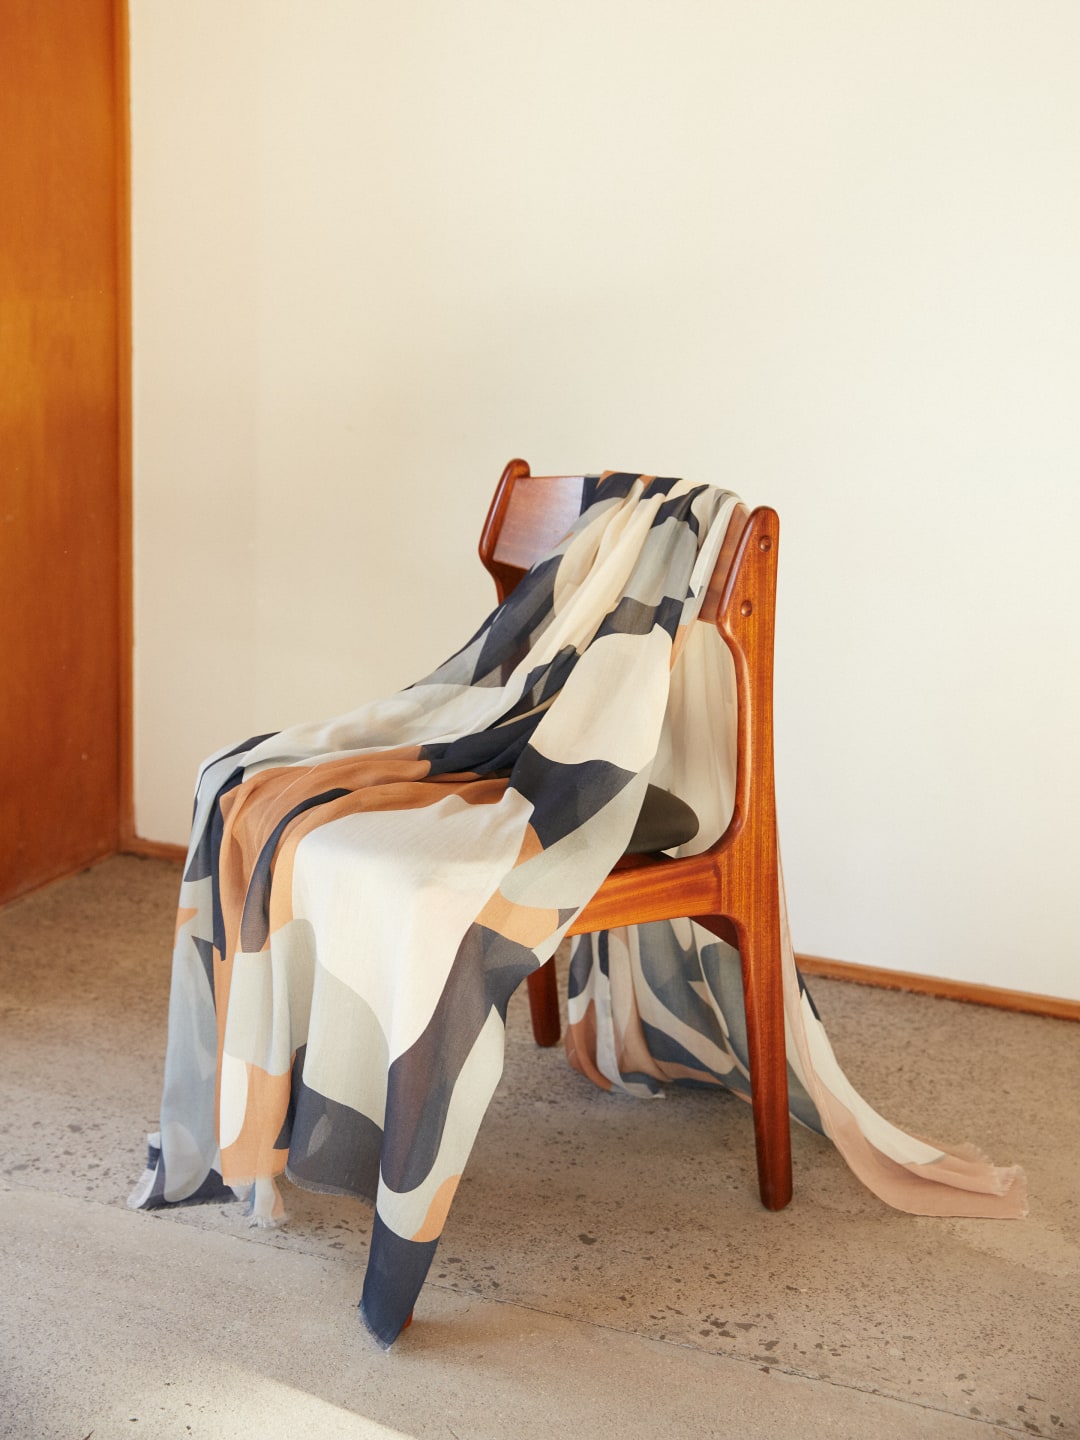 A Walker &amp; Bing Rosemary Scarf in a room with a blanket on it.